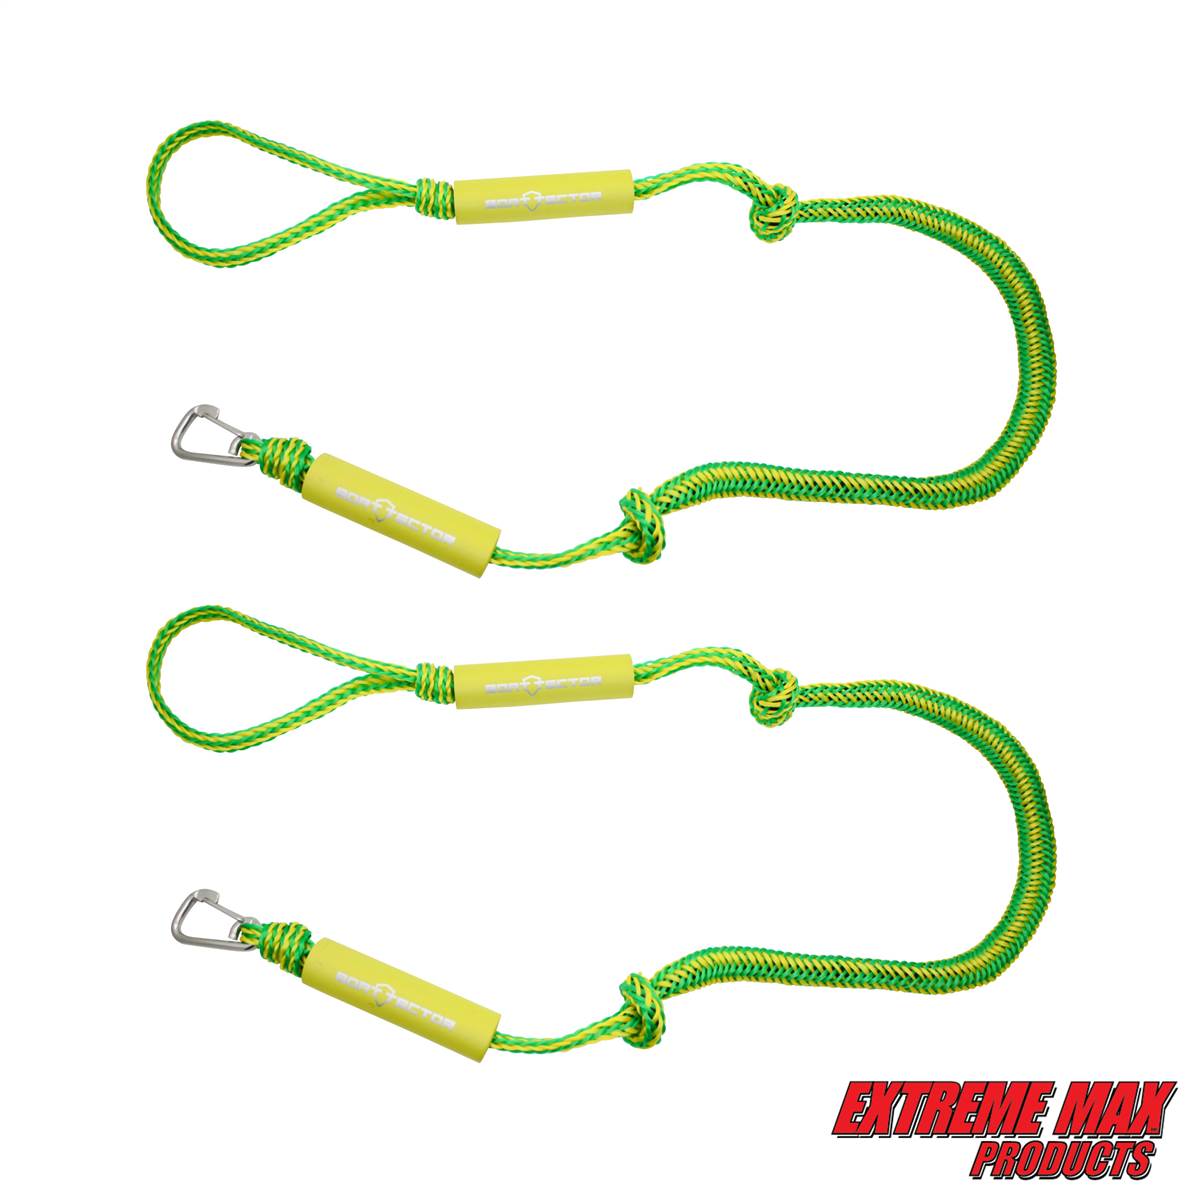 Extreme Max 3006.6634 PWC Dock Line with Metal Snap Hooks 